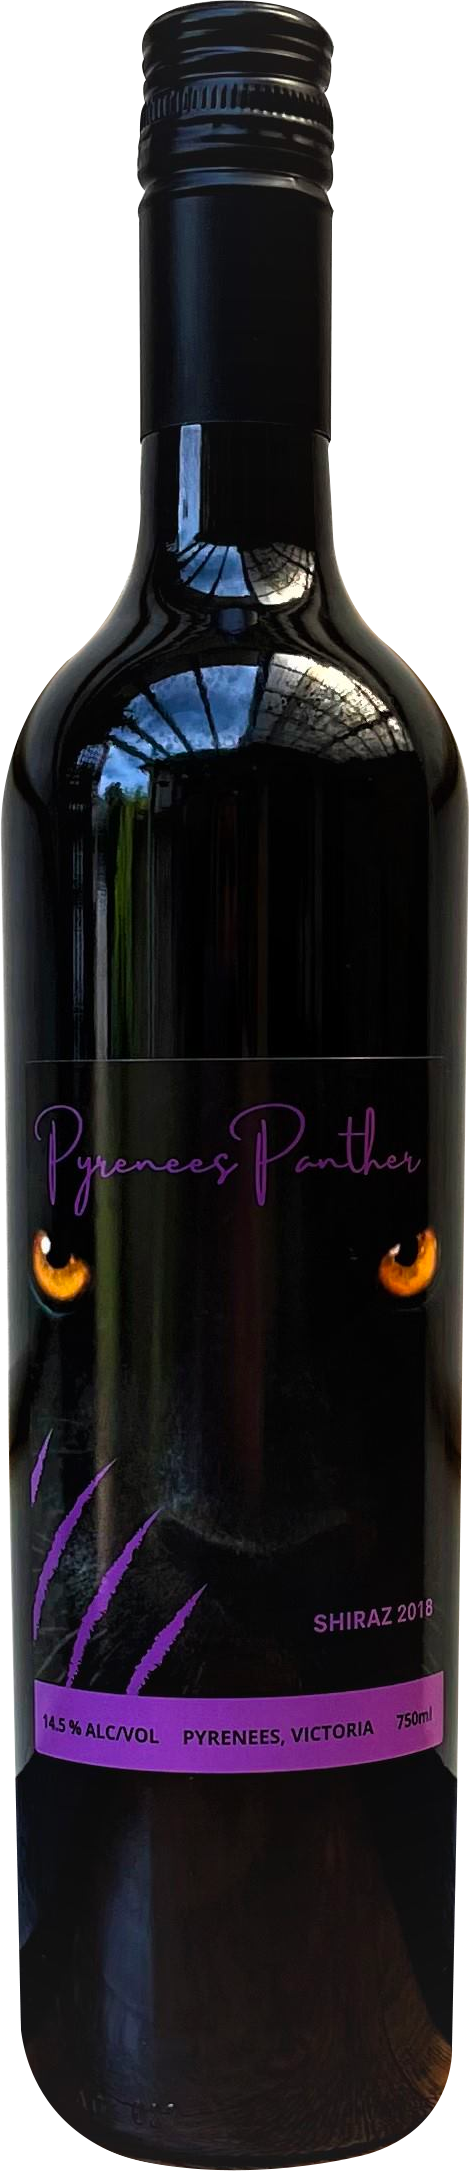 Pyrenees Panther-Shiraz 2018- WHOLESALE ONLY (Contact us for a quote)